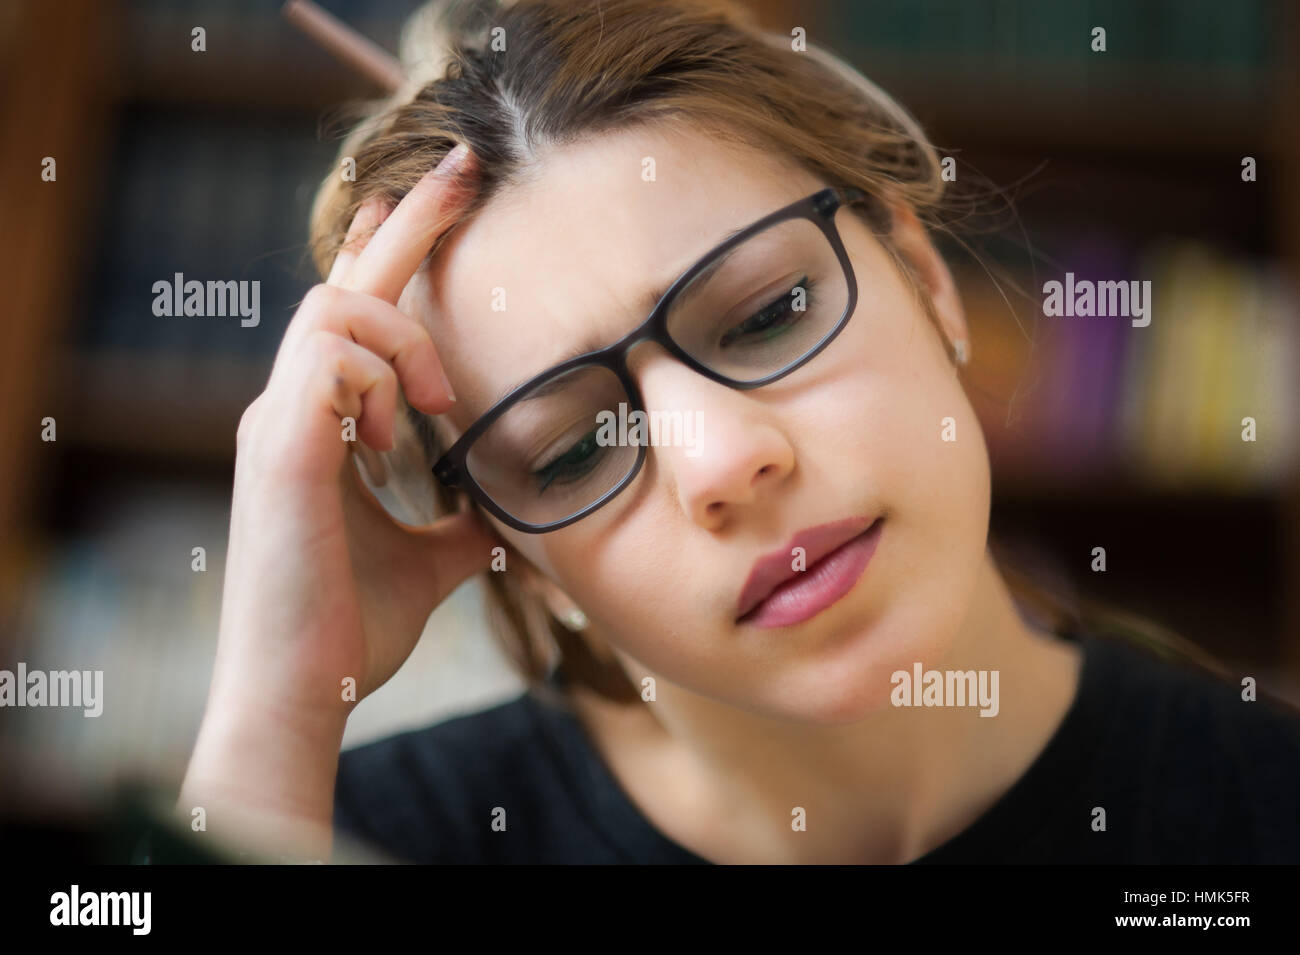 Young female student in library, portrait while focused studying, out of focus bookcase in background Stock Photo